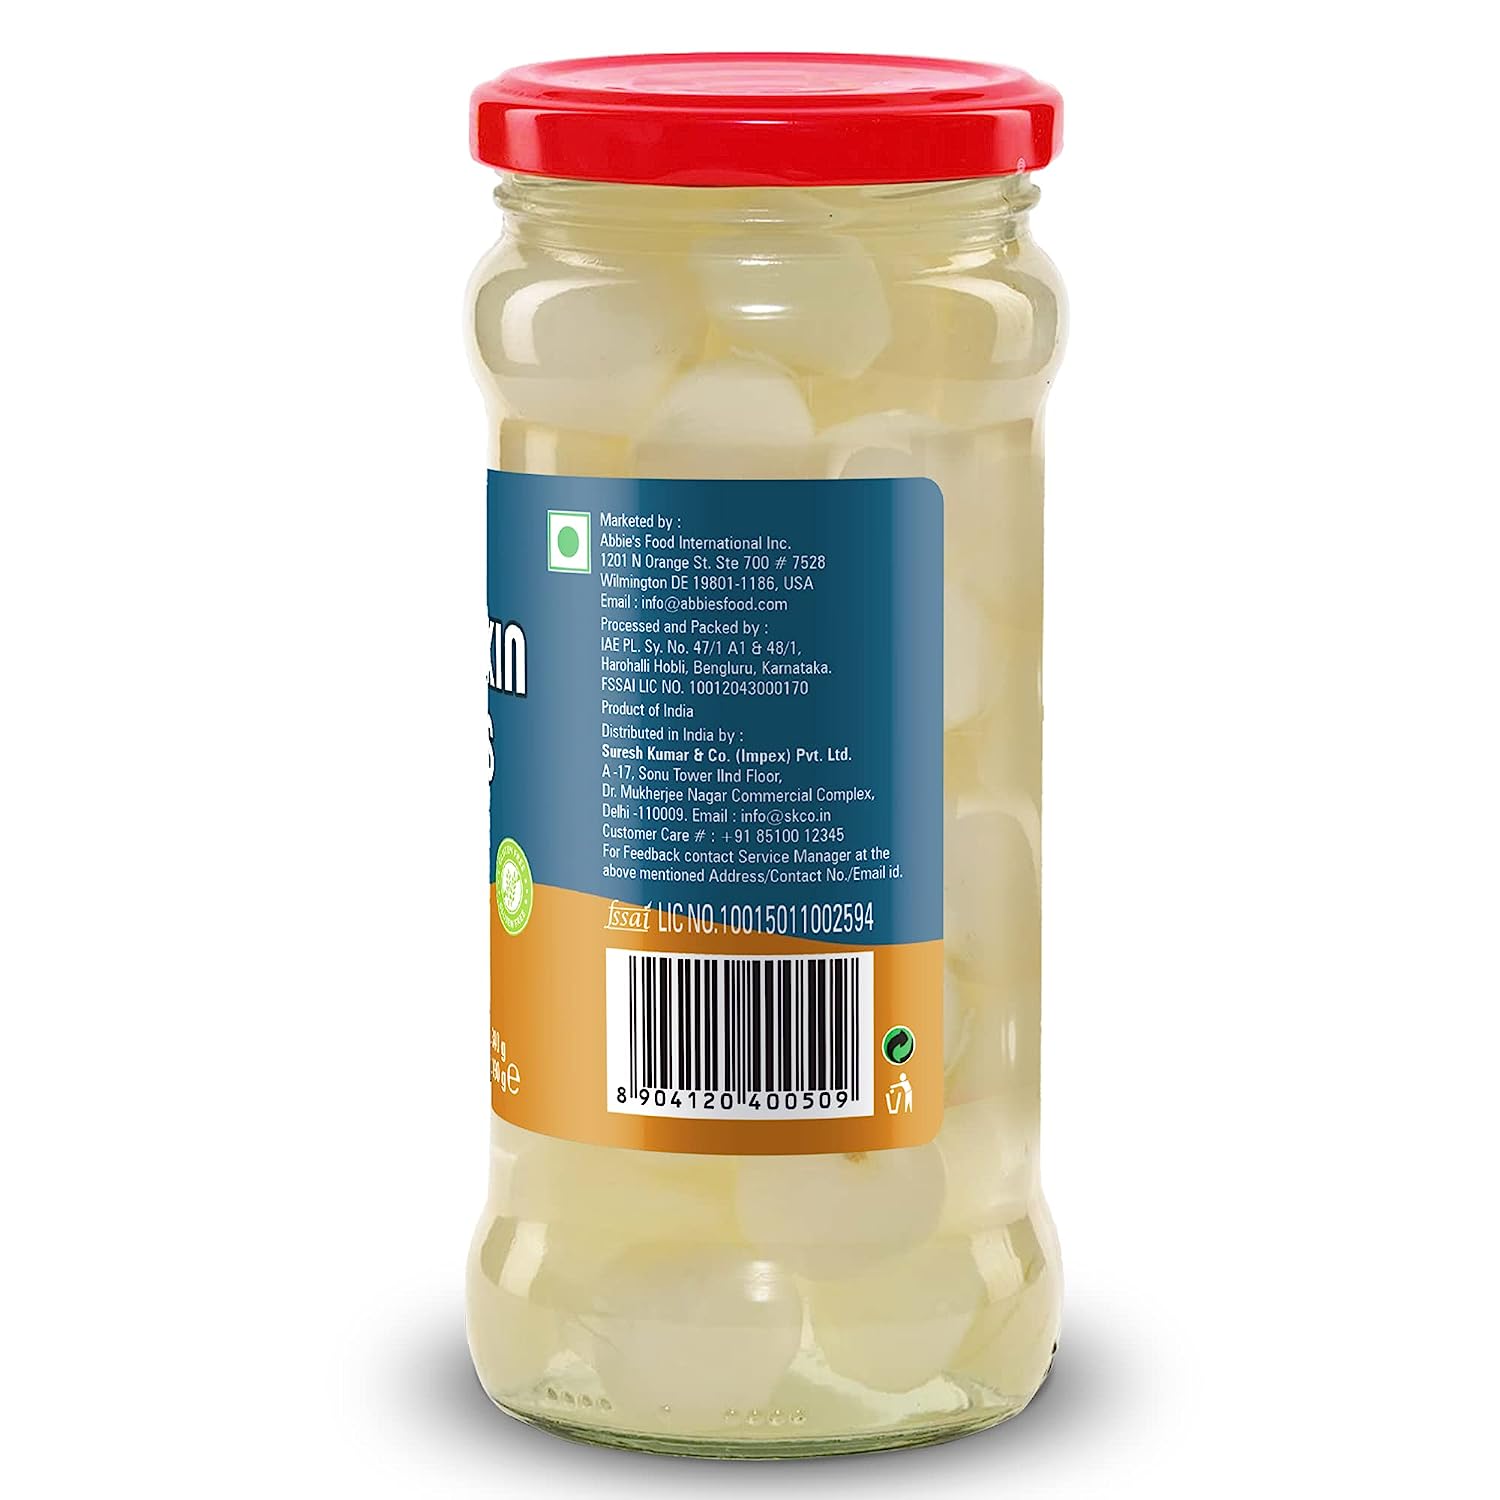 Abbies Silver Skin Onion In Brine, 355g (Imported)